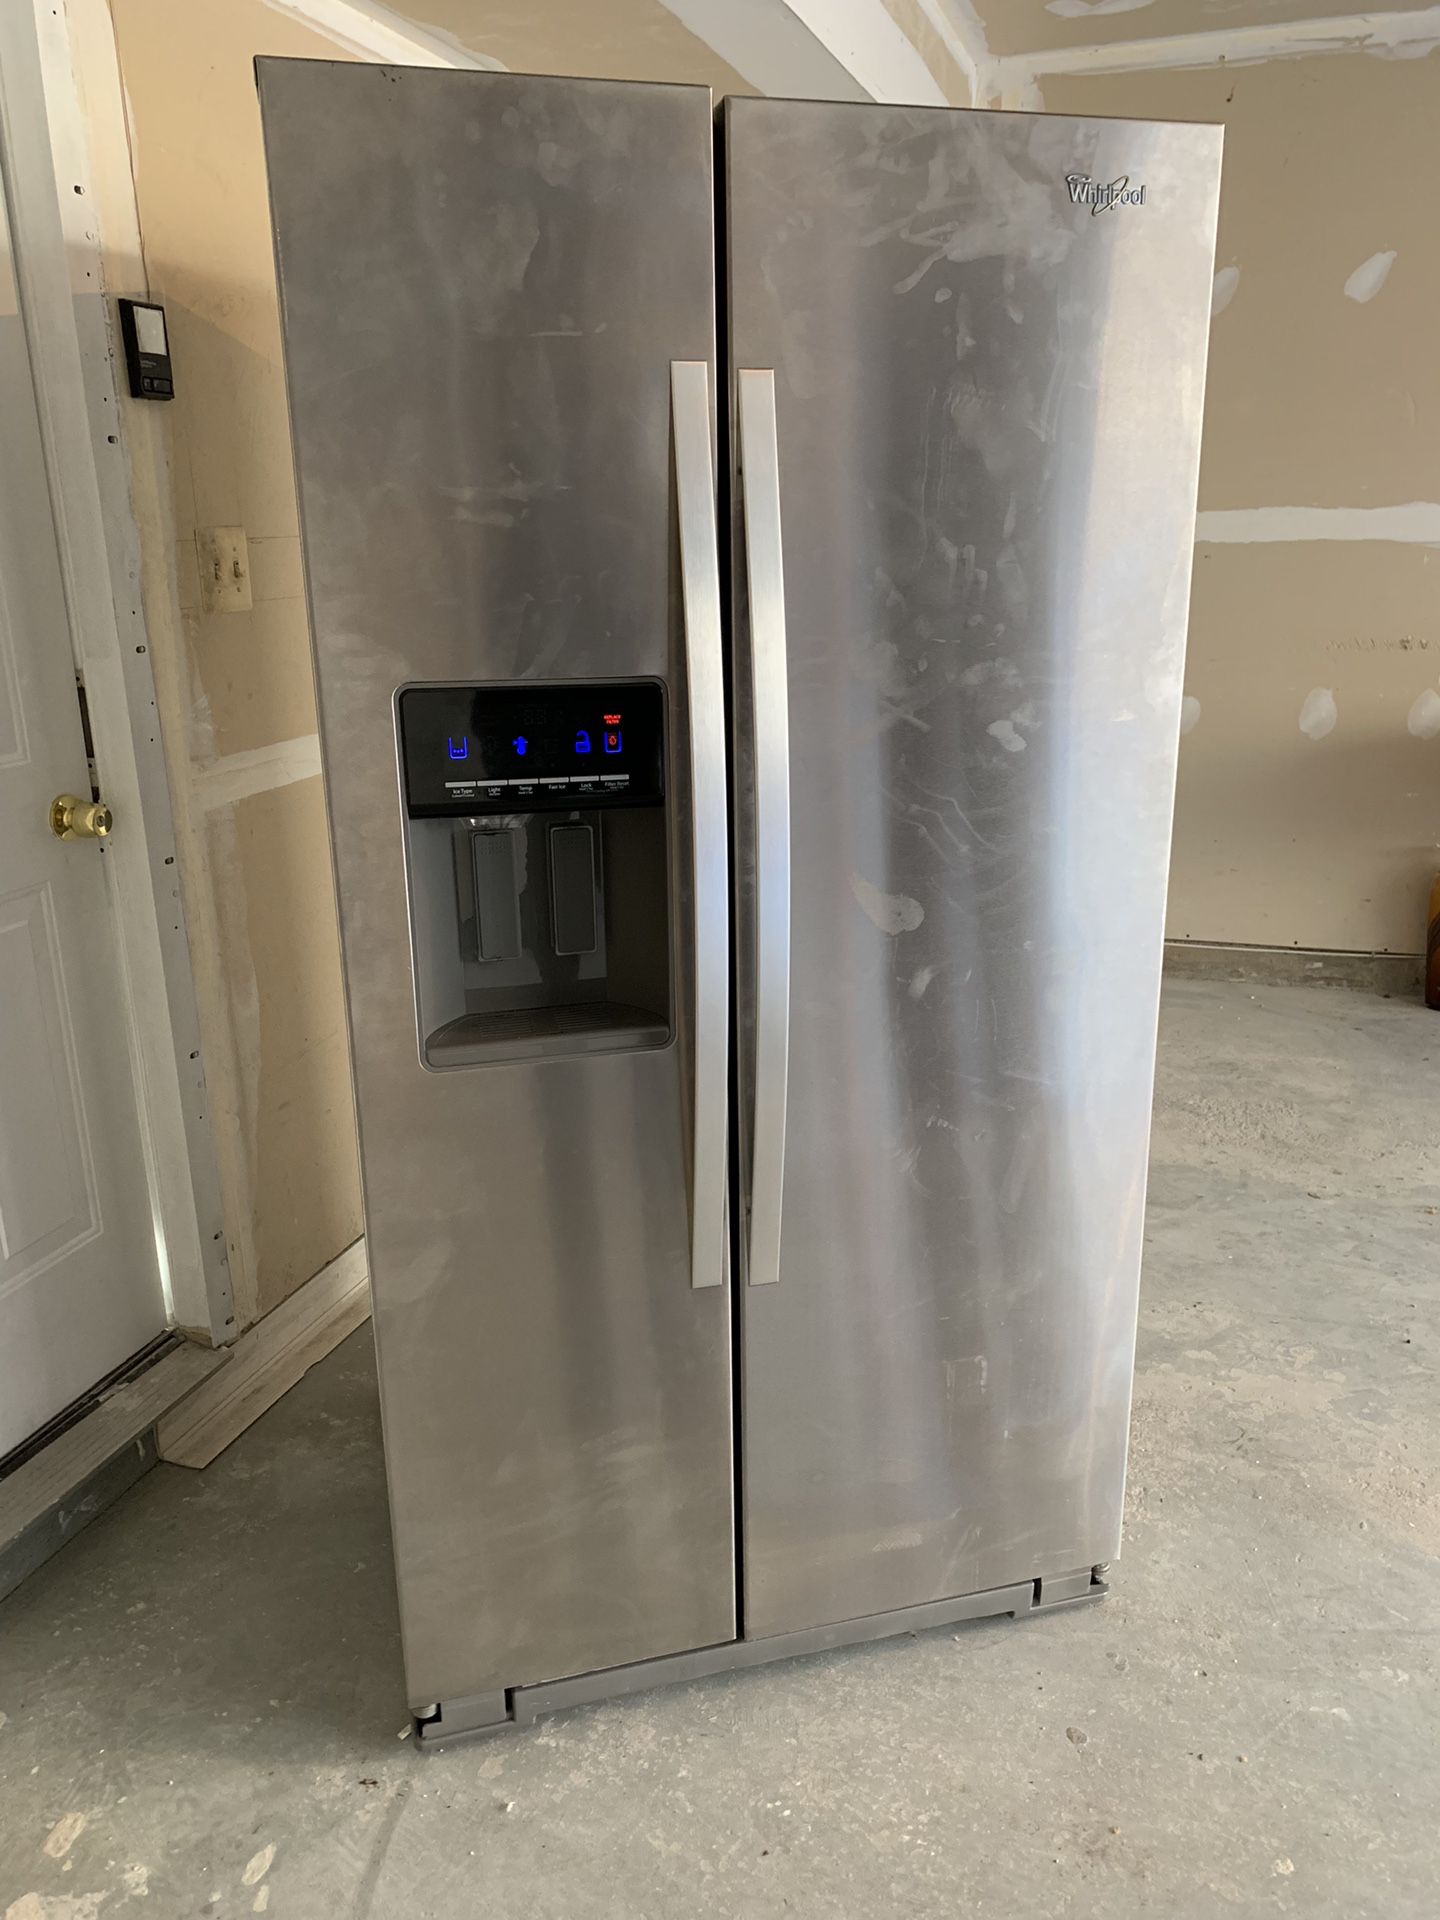 Stainless Steel Whirlpool Side-by-Side Refrigerator